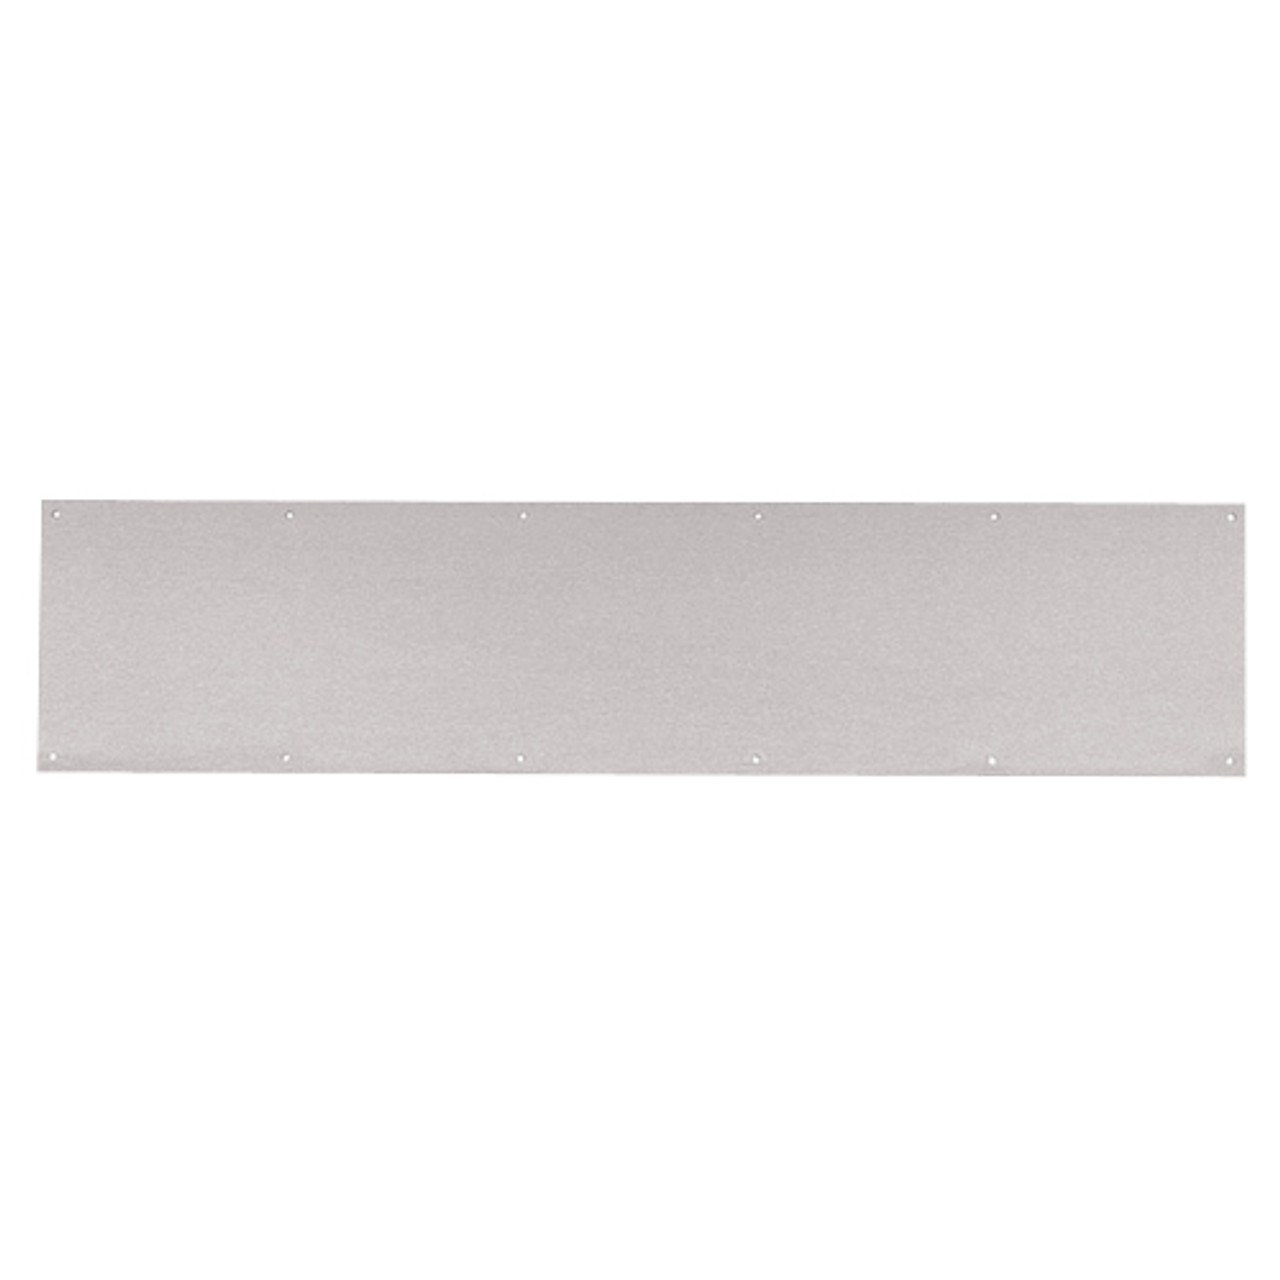 8400-US32D-14x40-B-CS Ives 8400 Series Protection Plate in Satin Stainless Steel